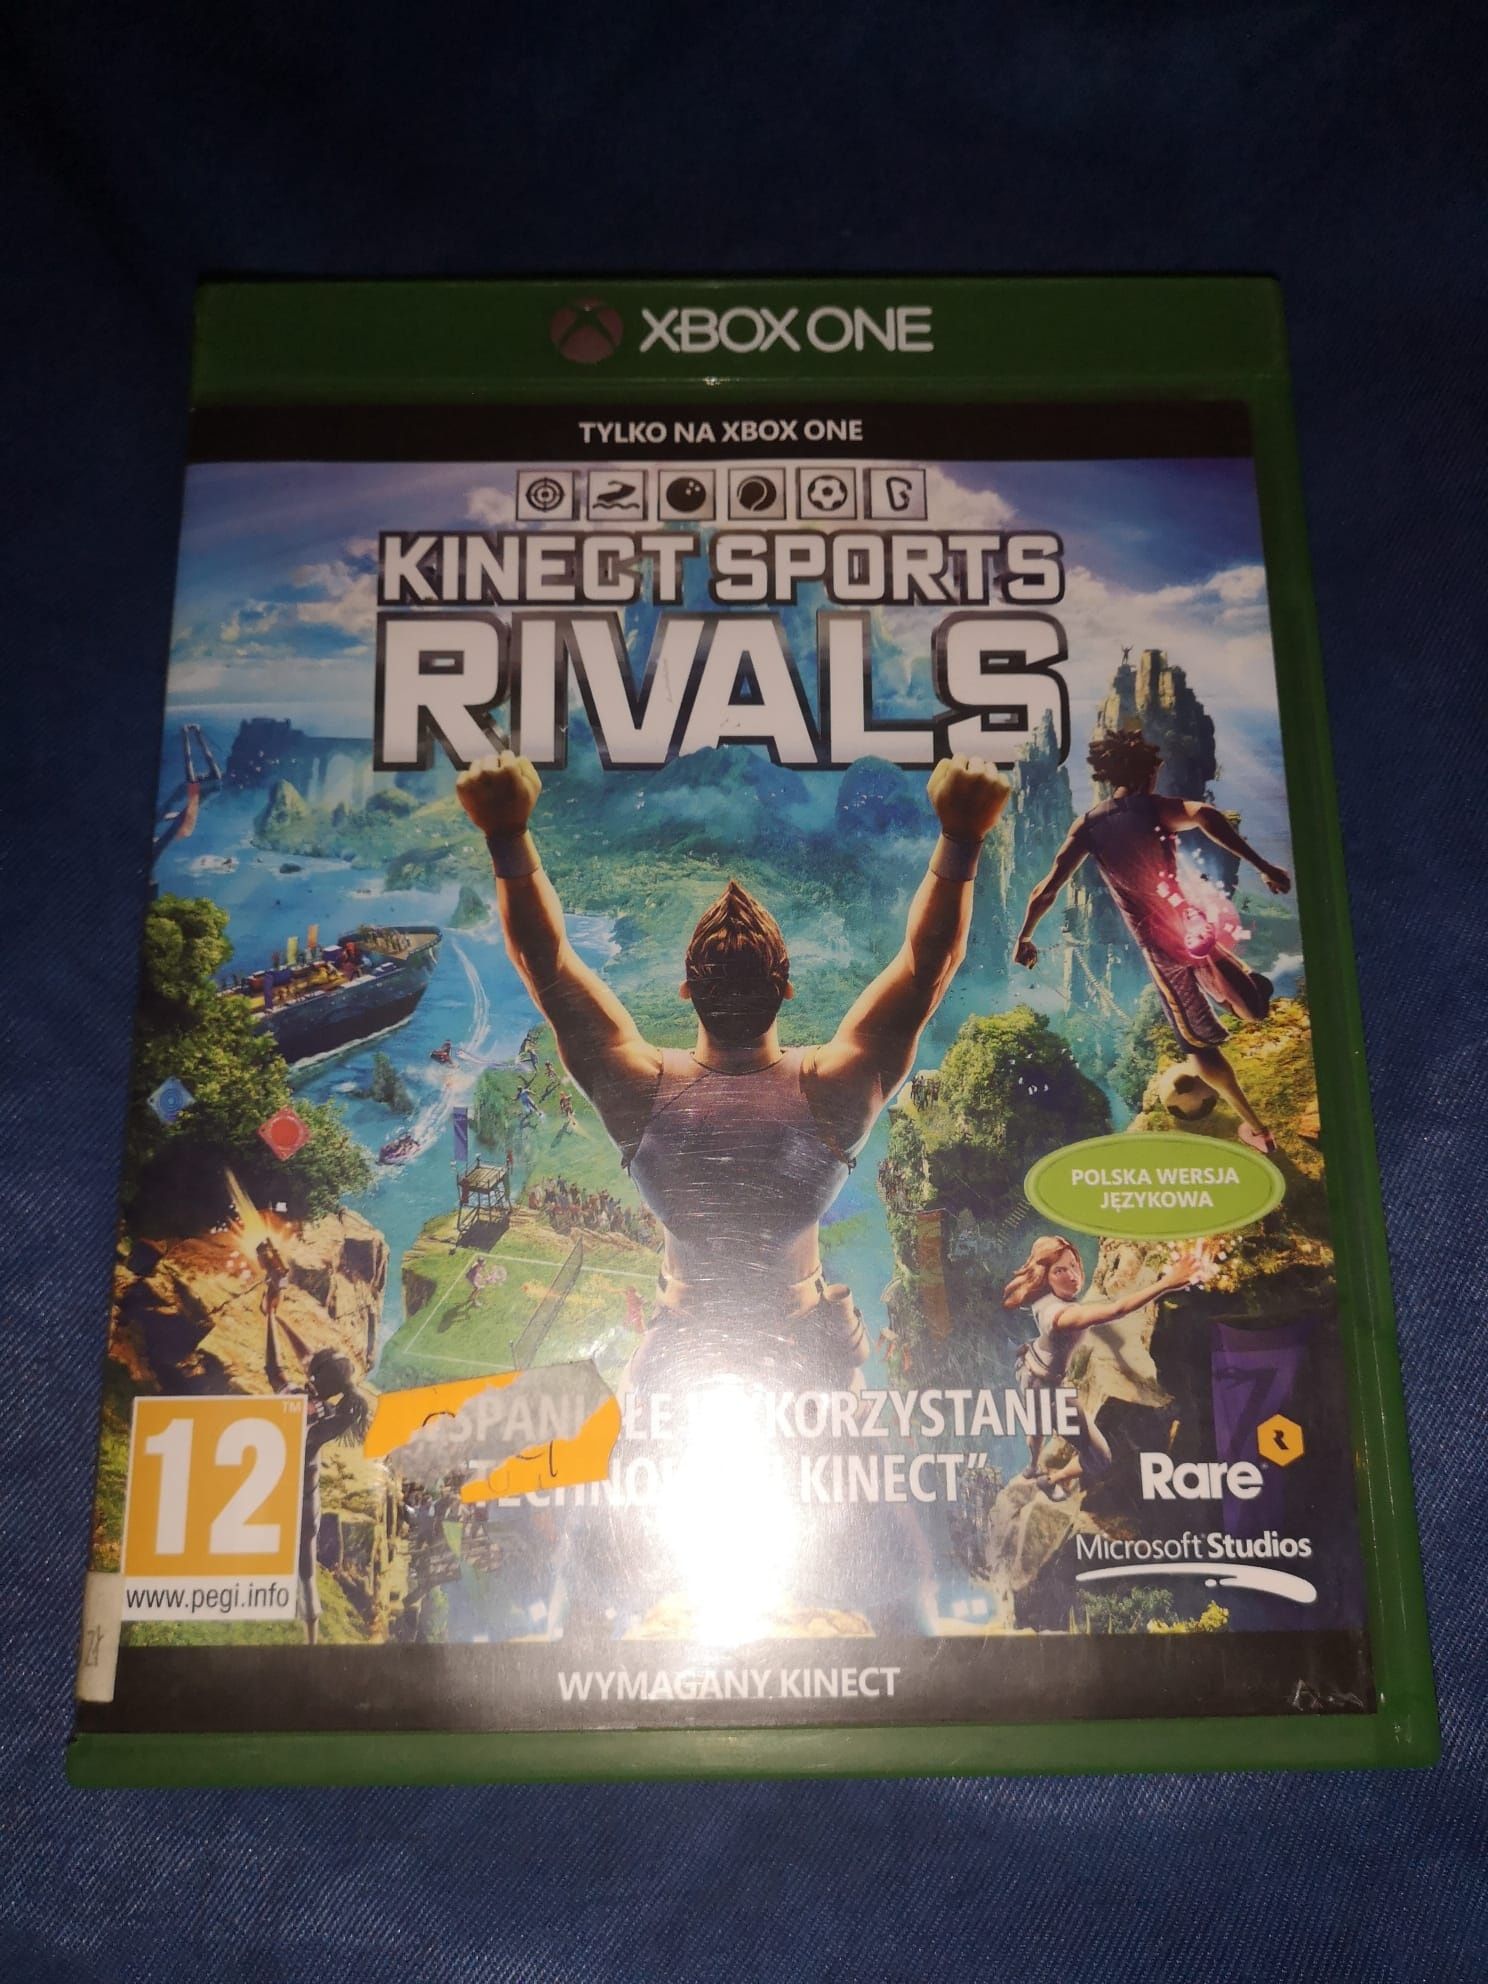 Rivals kinect sports